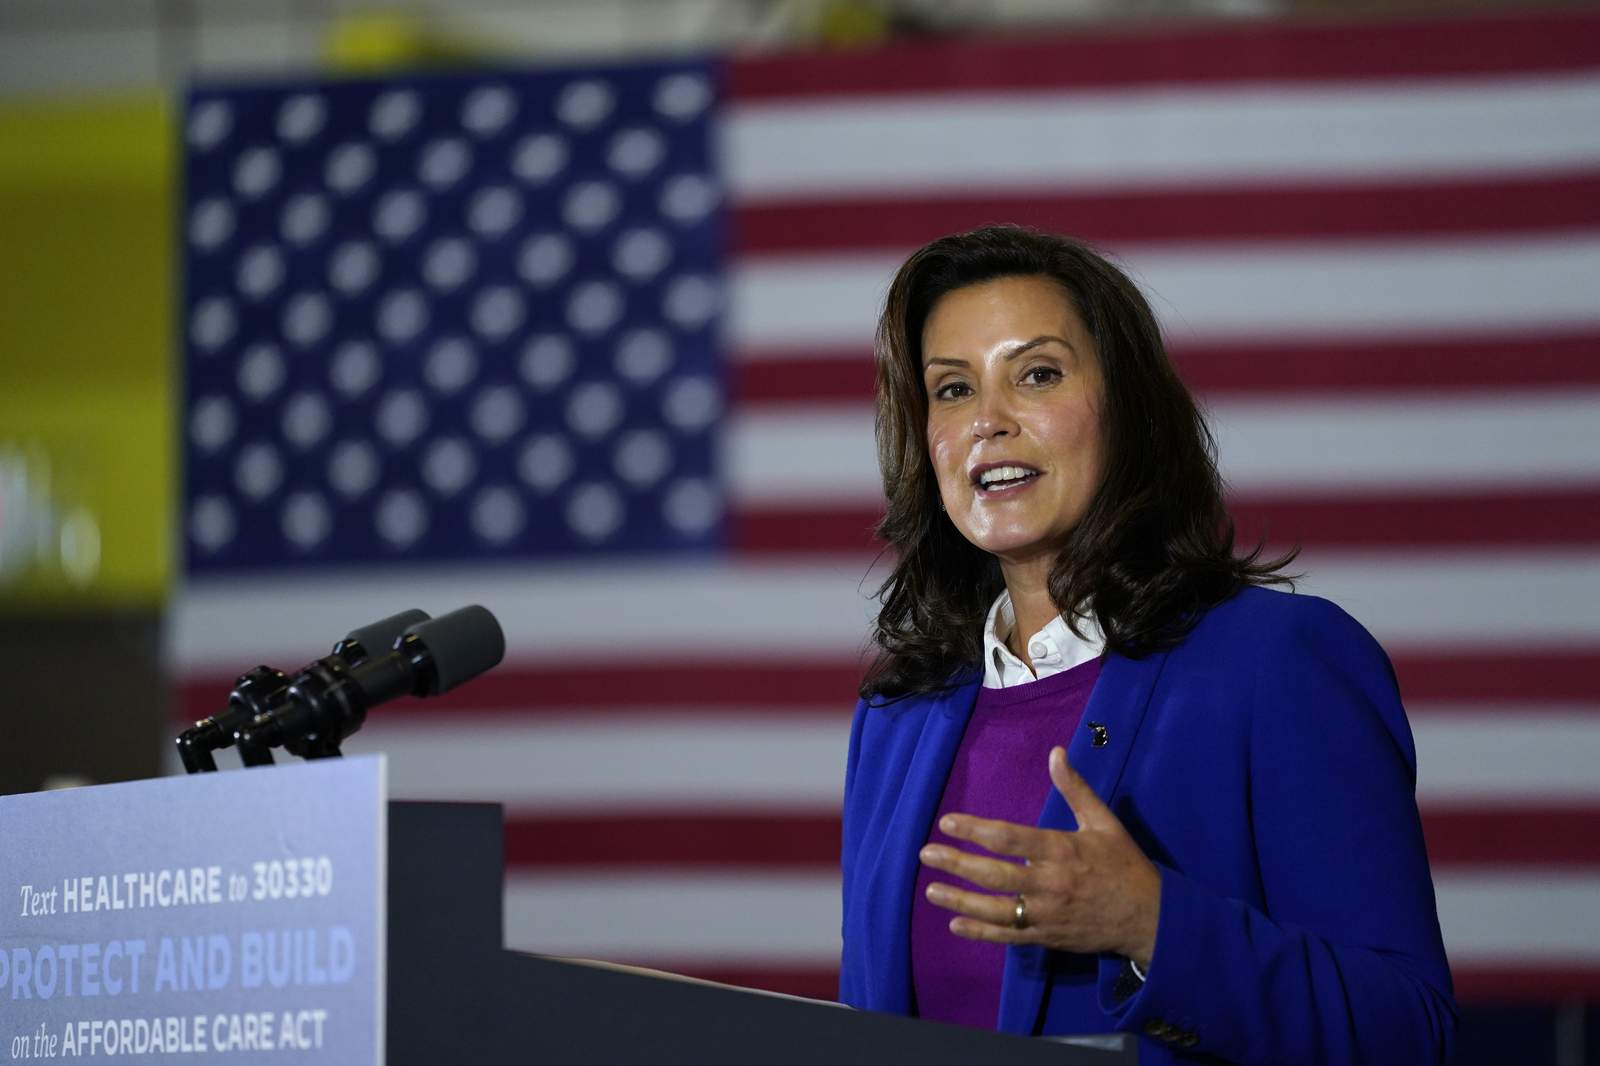 Gov. Whitmer signs bills allowing college athletes in Michigan to make money off name, image, likeness